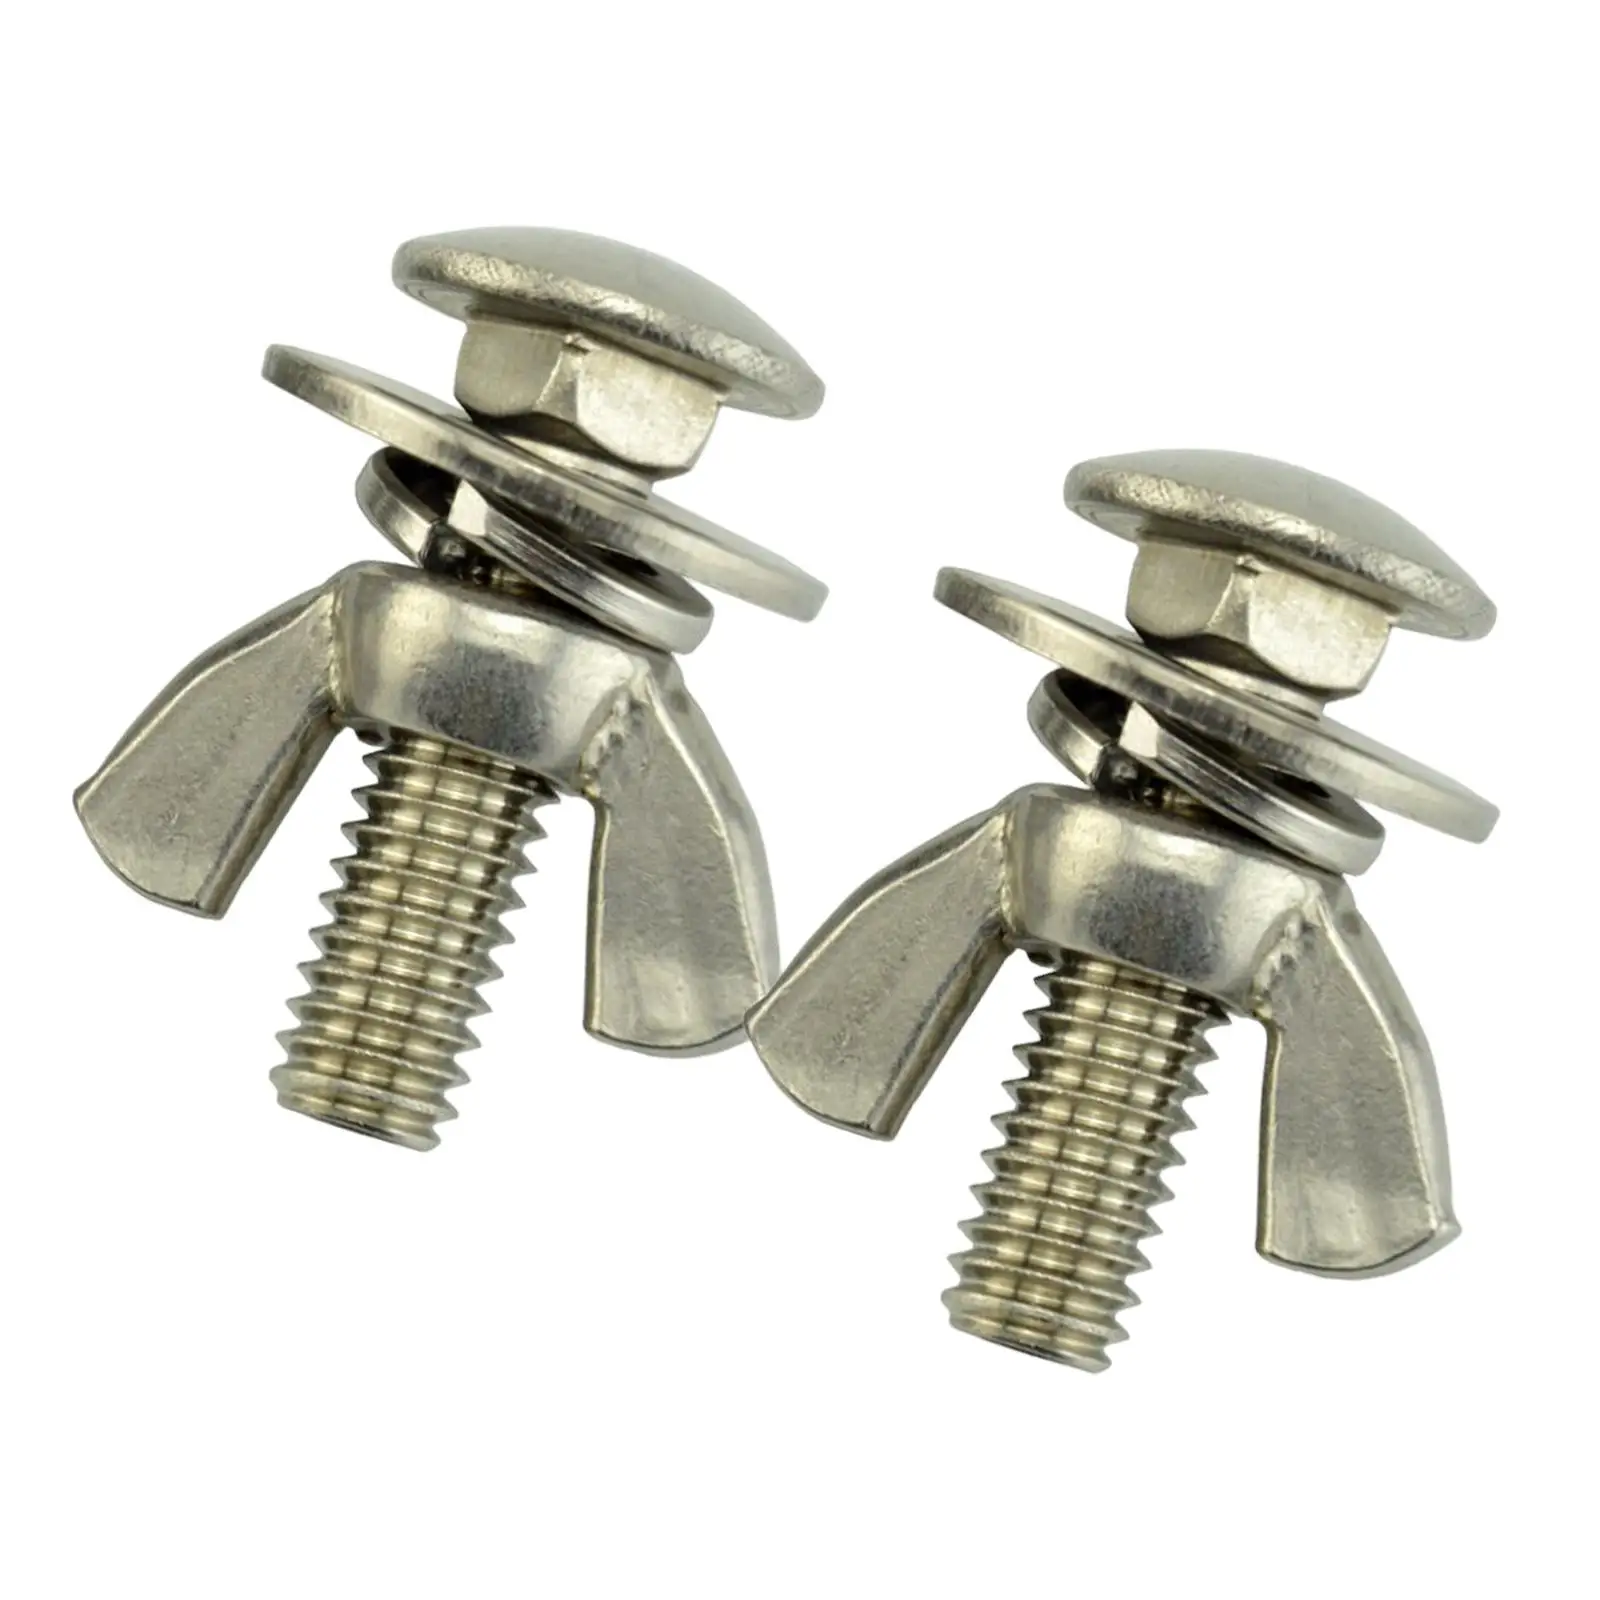 2x Tech Diving Butterfly Screw Bolts Wing Nut Set 316 Stainless Steel Thumb Screws Fastener Fit for Backplate Accessories